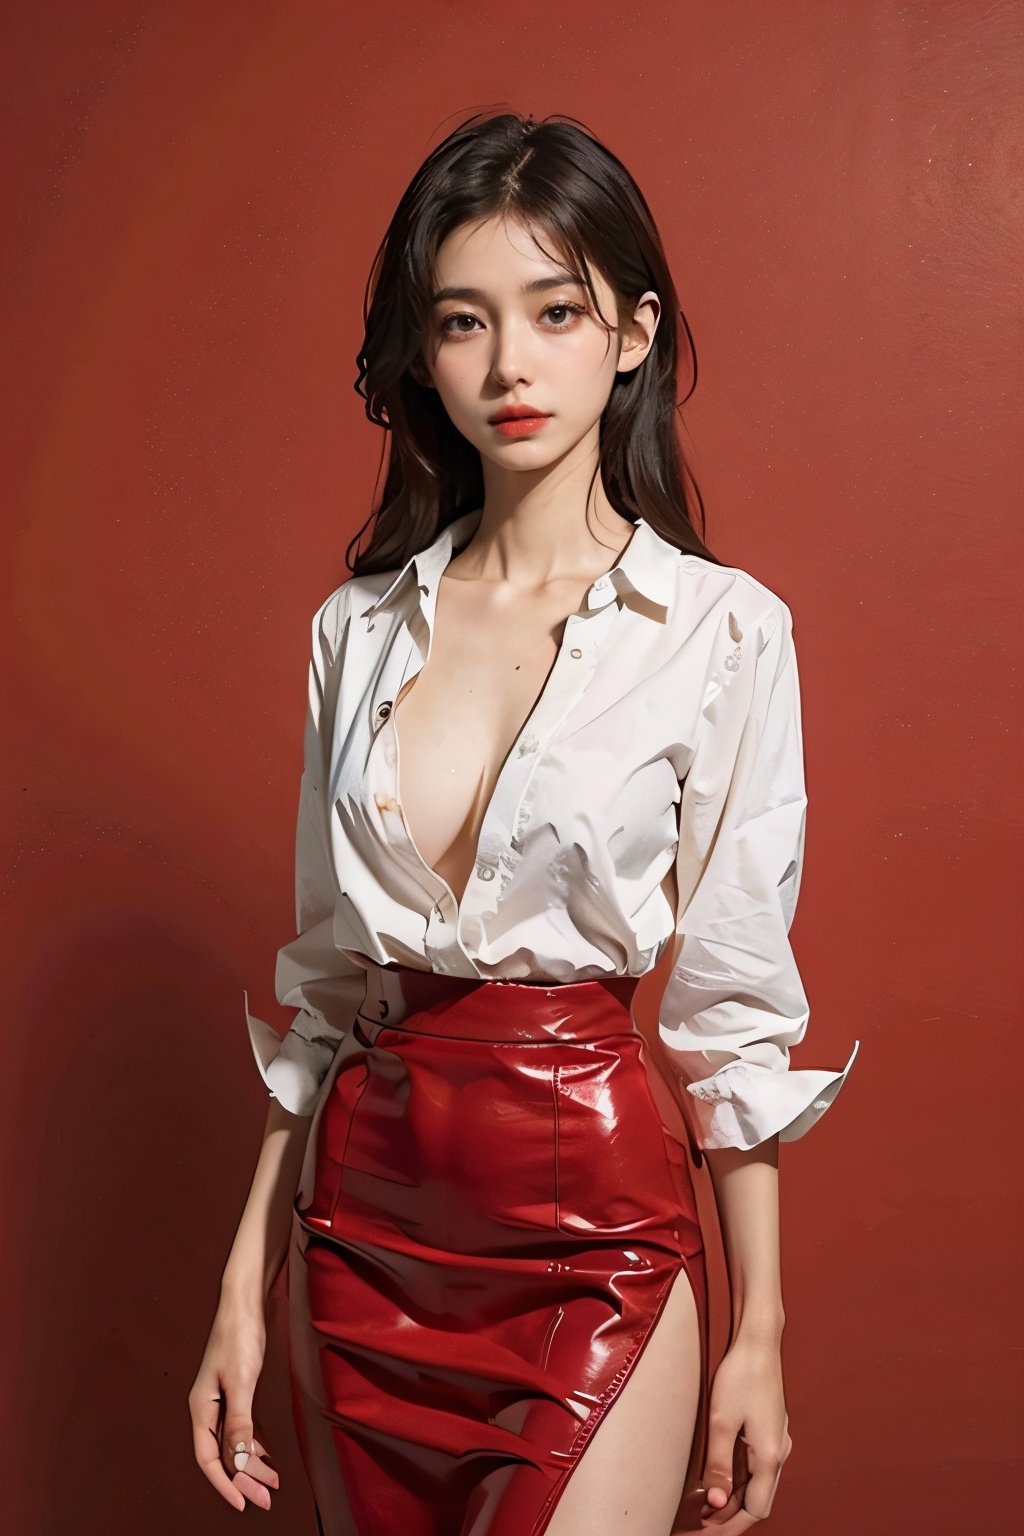 realistic,Masterpiece,1 girl,thigh,cleavage cutout,white blouse, skirt,((red background))